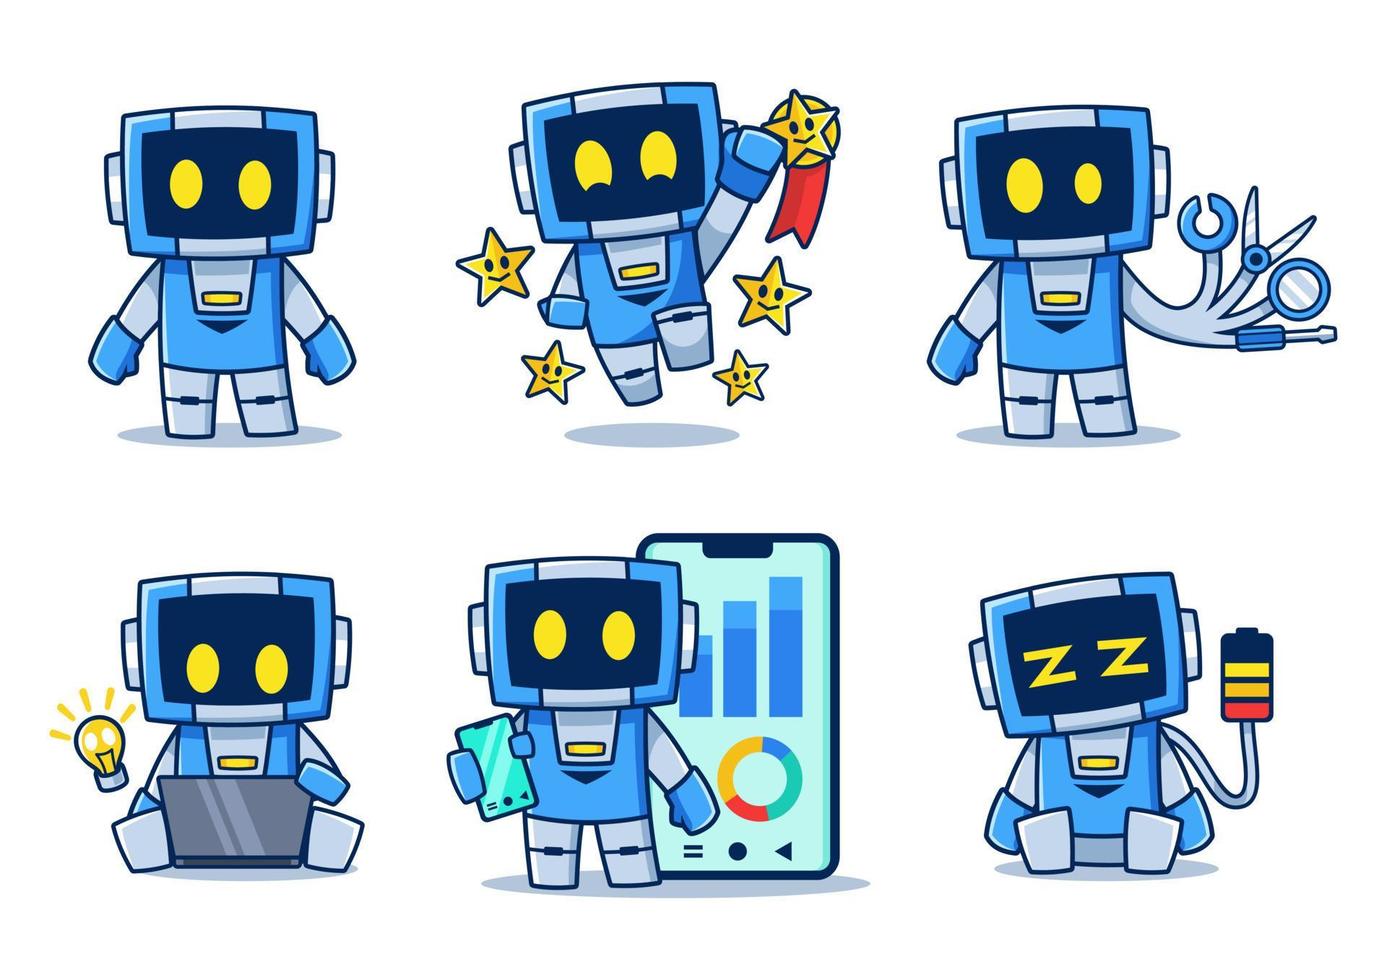 Blue Robot cartoon character in different poses vector